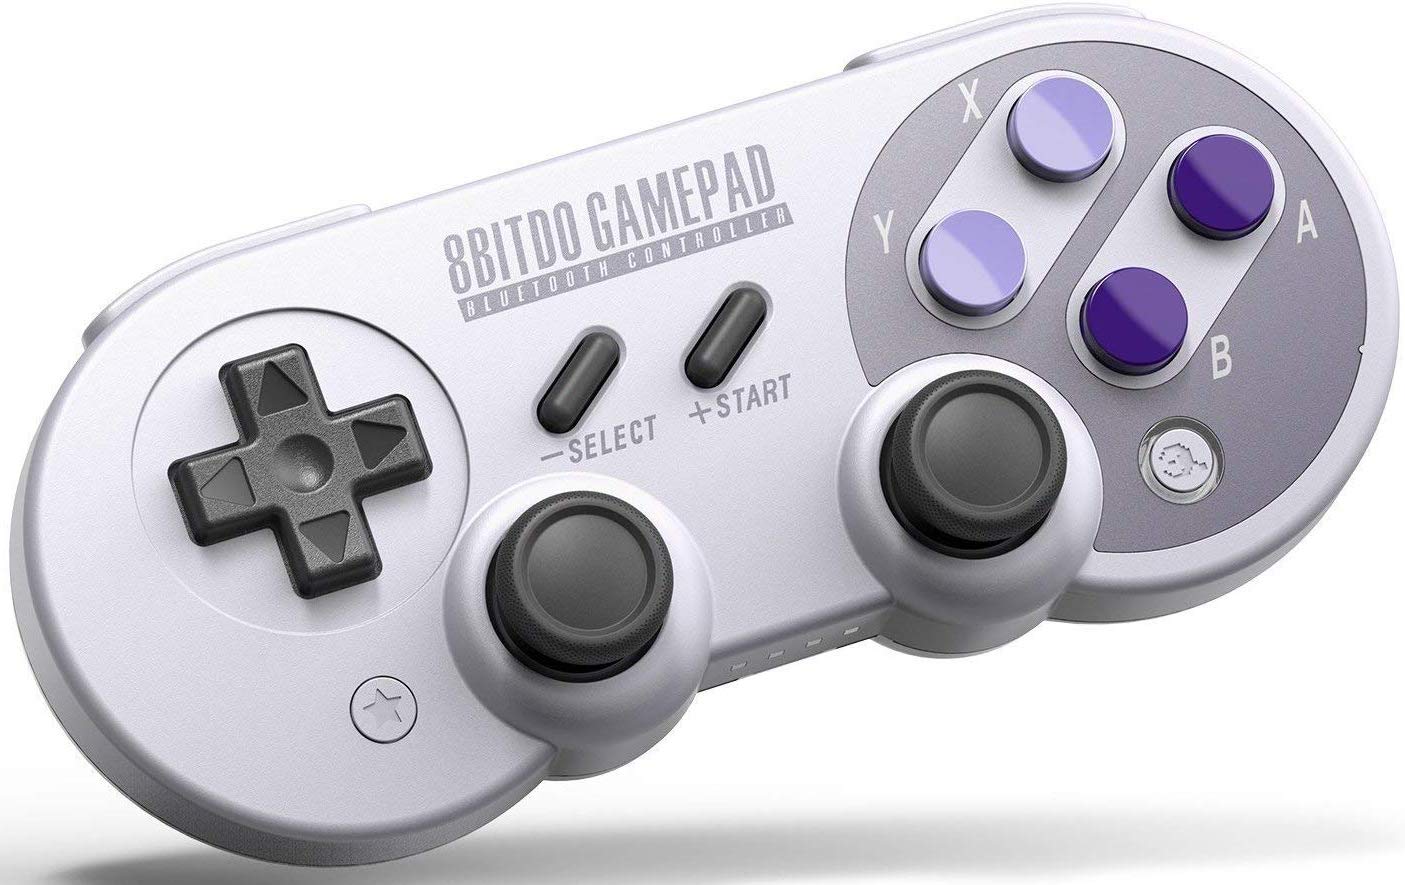 Nintendo Switch Pro Controller Vs 8bitdo Sn30 Pro Controller Which Should You Buy Imore